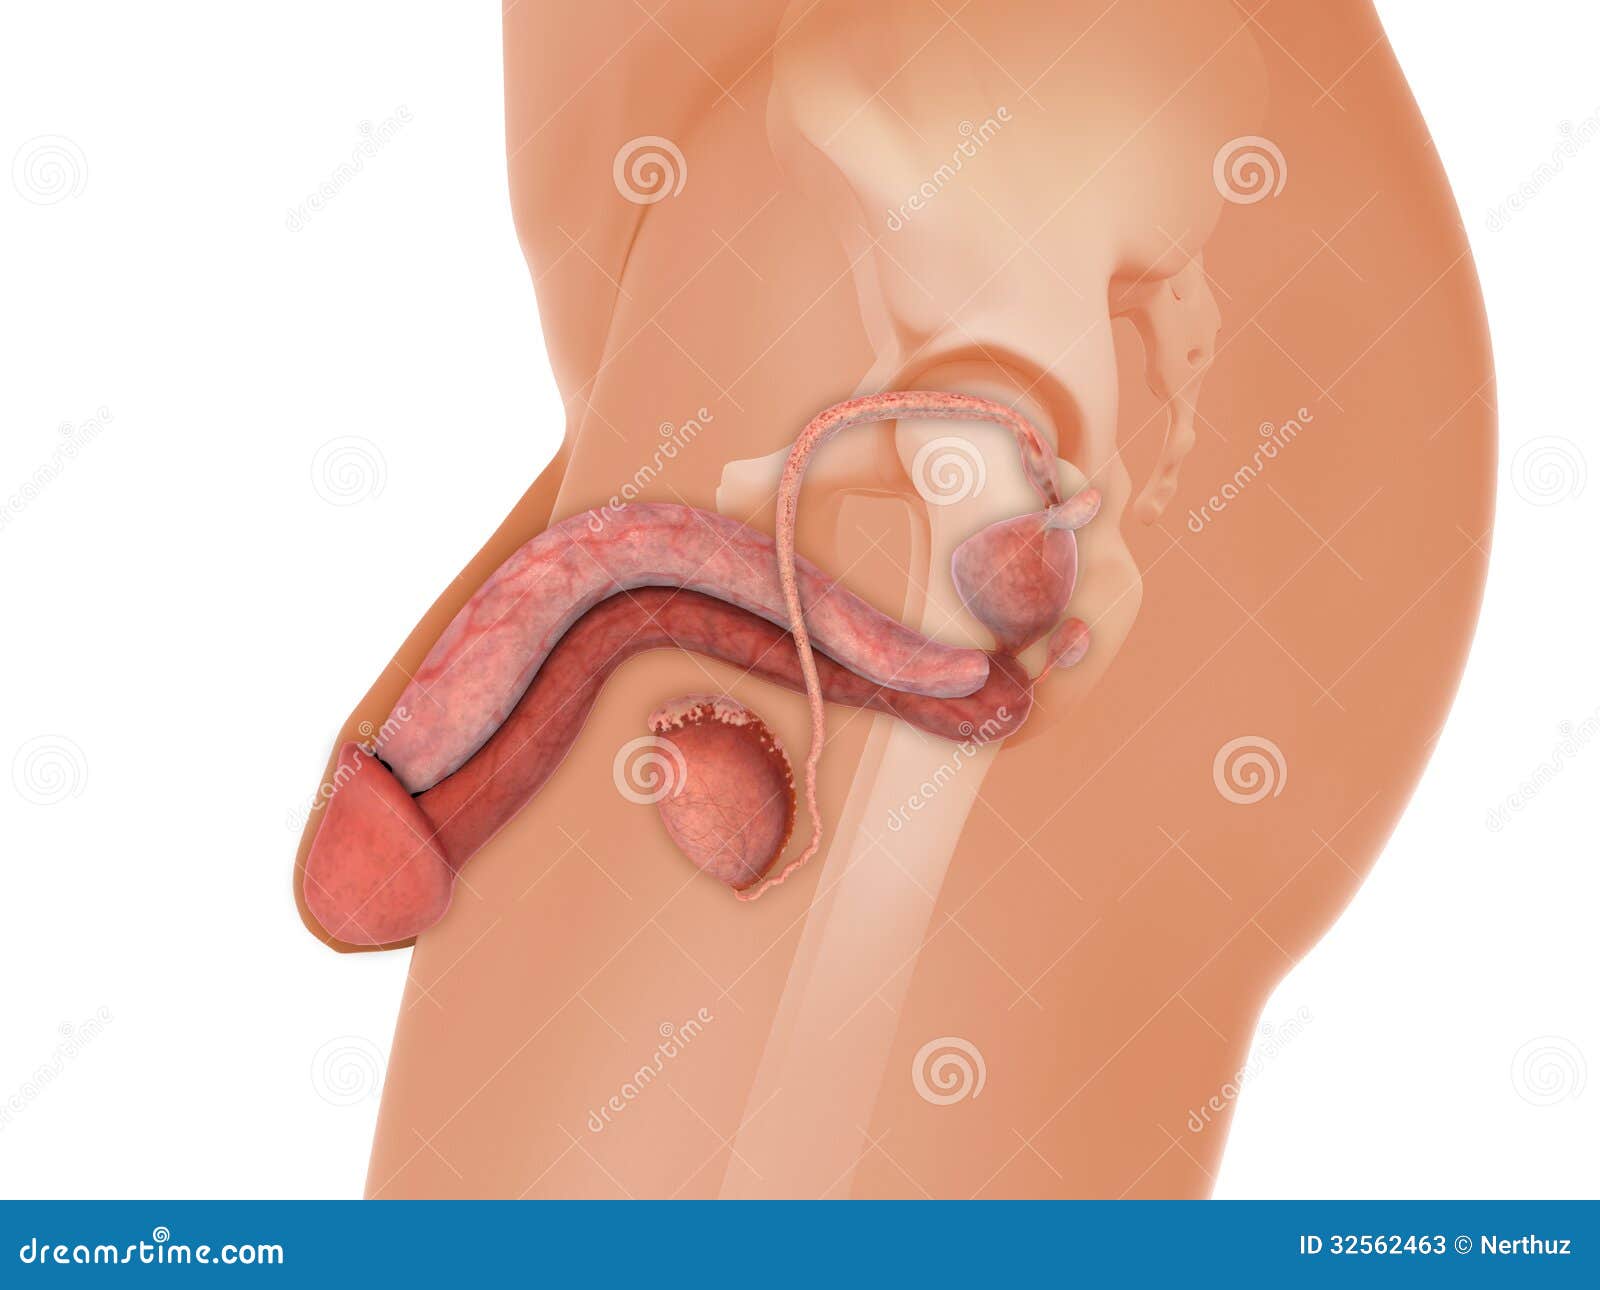 Male Reproductive System stock illustration. Illustration of anatomical -  32562463